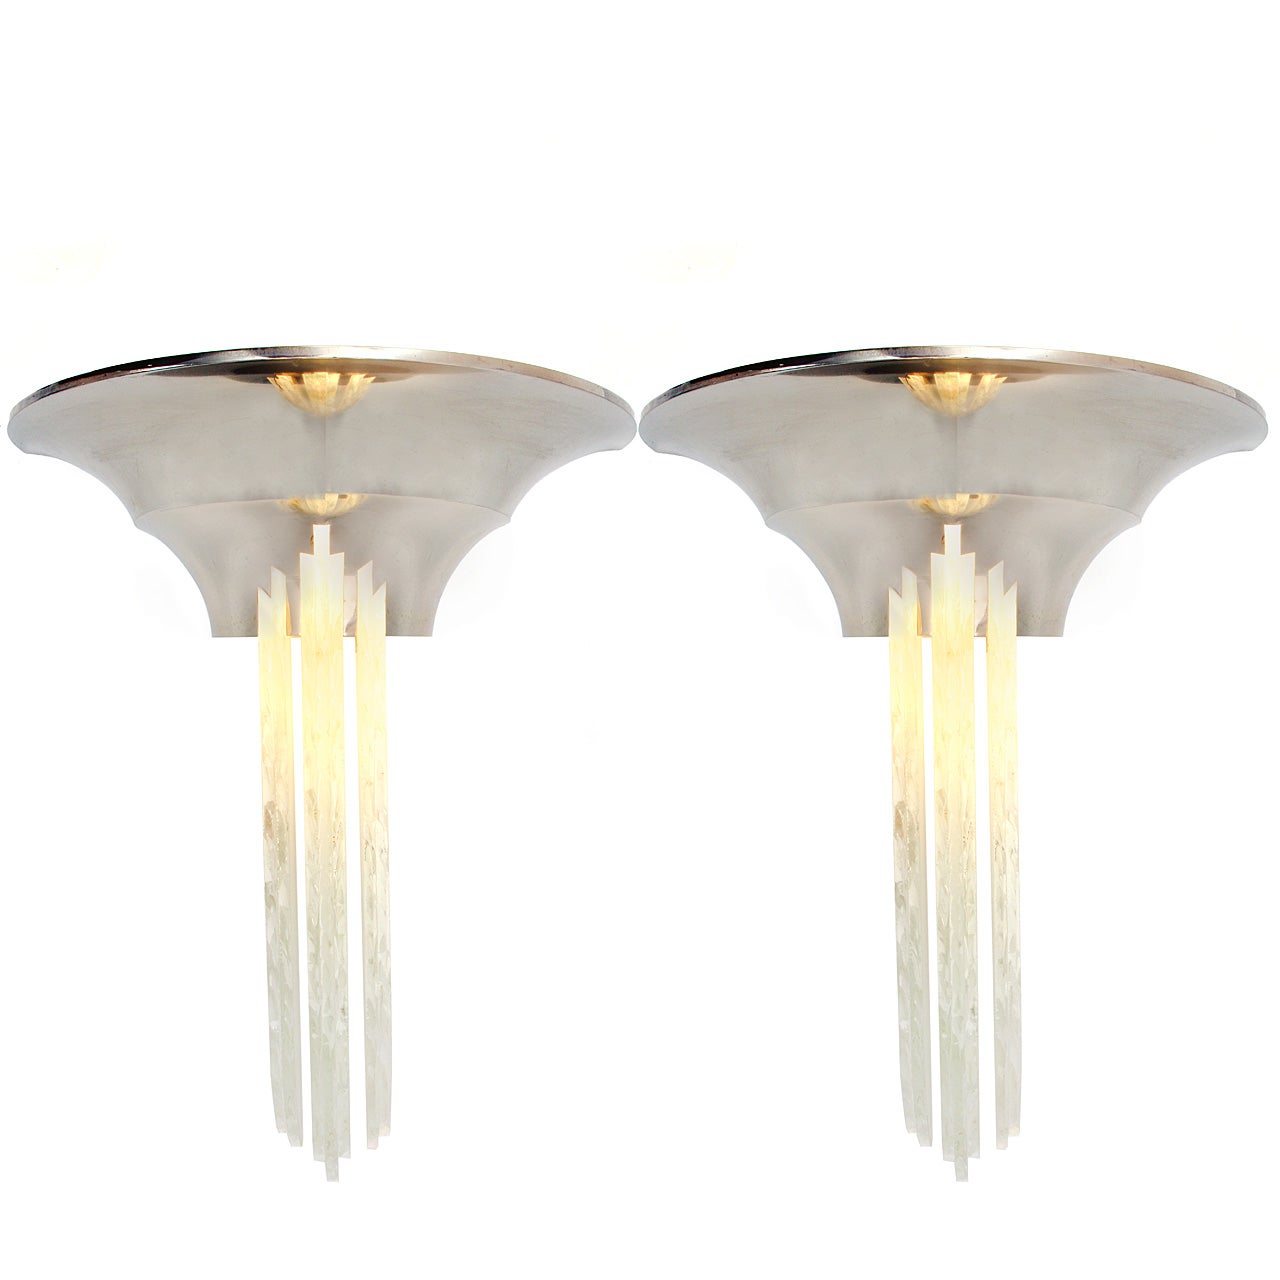 A pair of large light Art Deco sconces with cascading Gobain glass elements with sculptural chromed uplights.